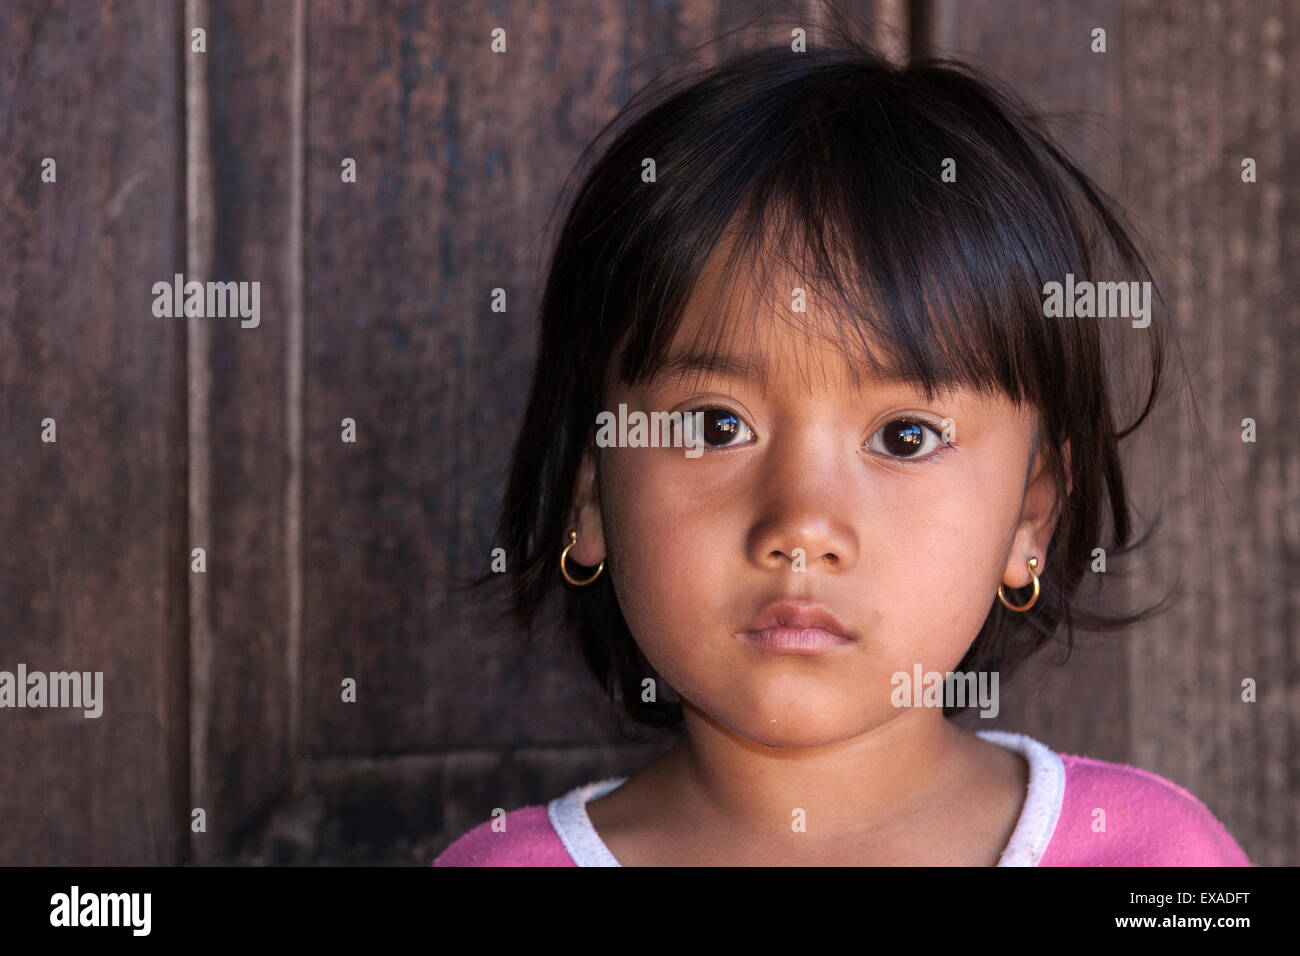 Girls from the Palaung tribe, Portrait, Taung Ni Village, Kalaw, Shan State, Myanmar Stock Photo